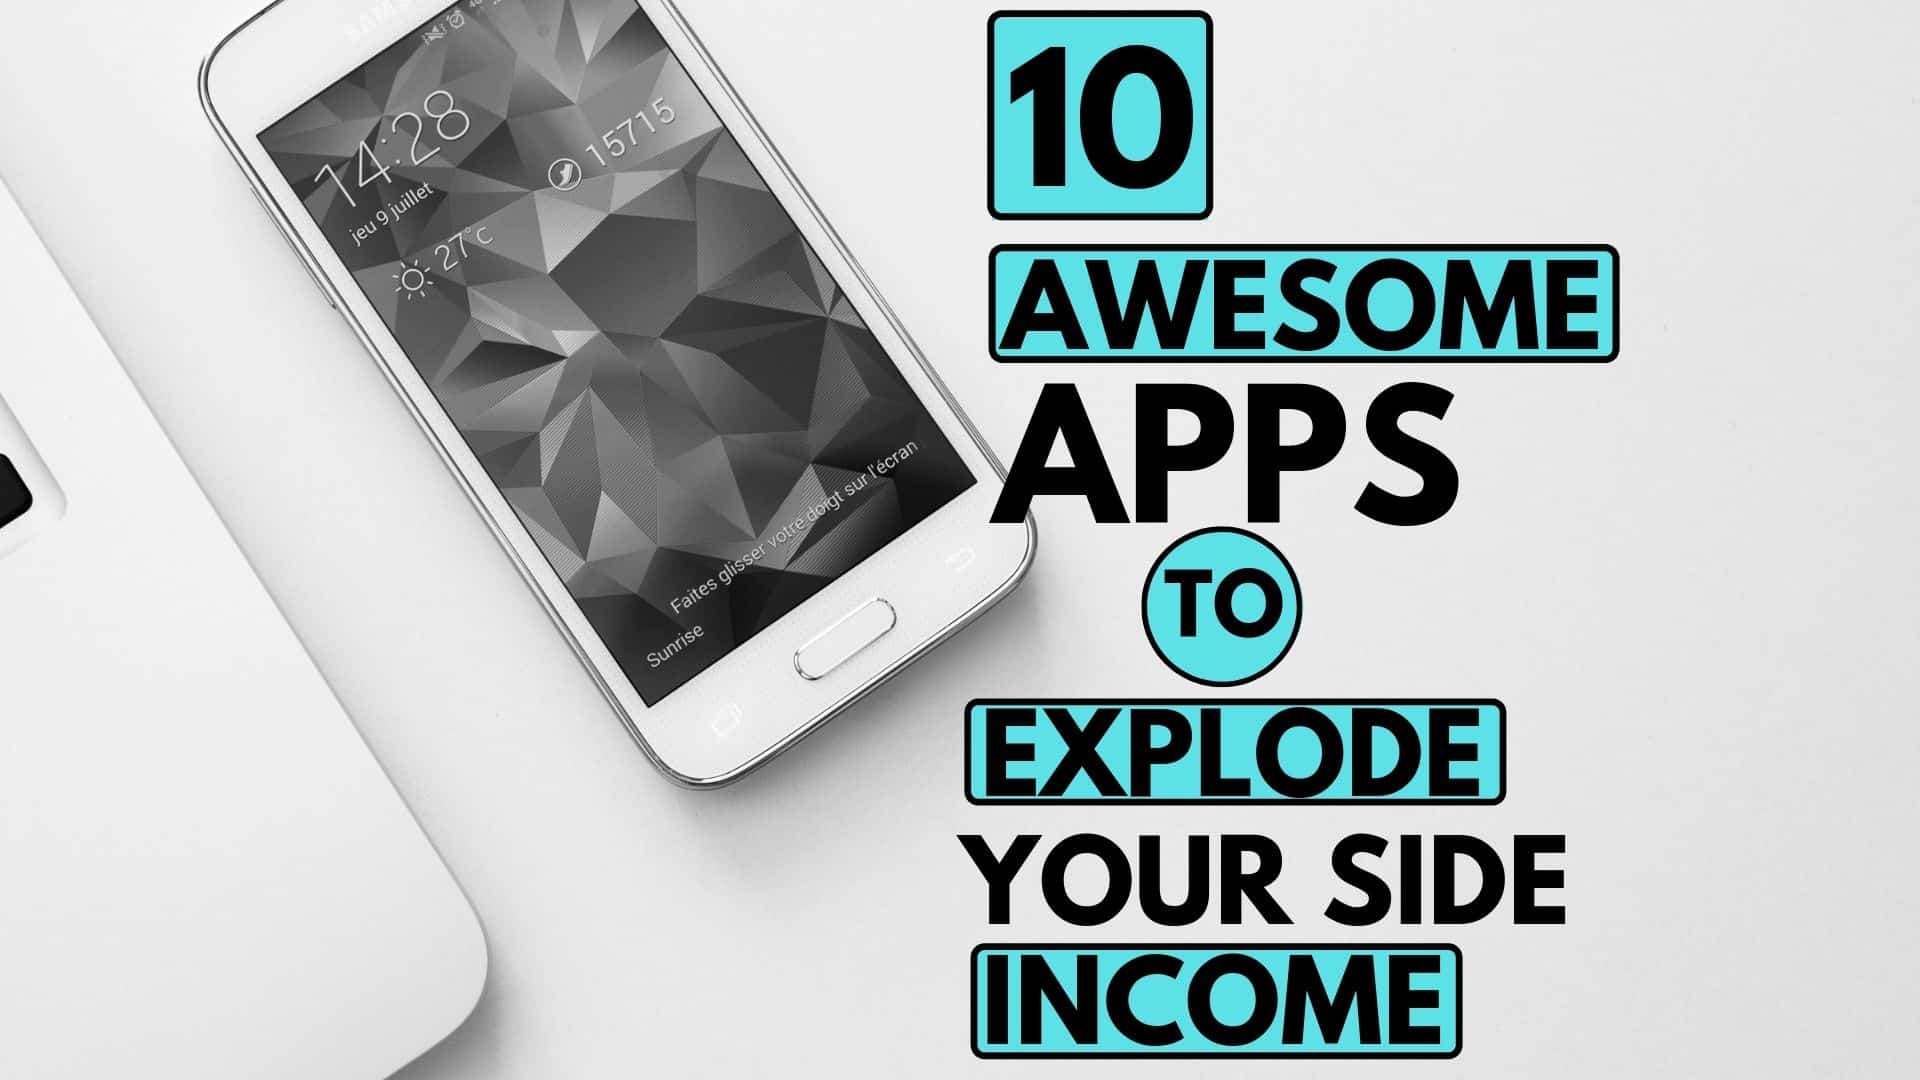 10 apps to explode your side income